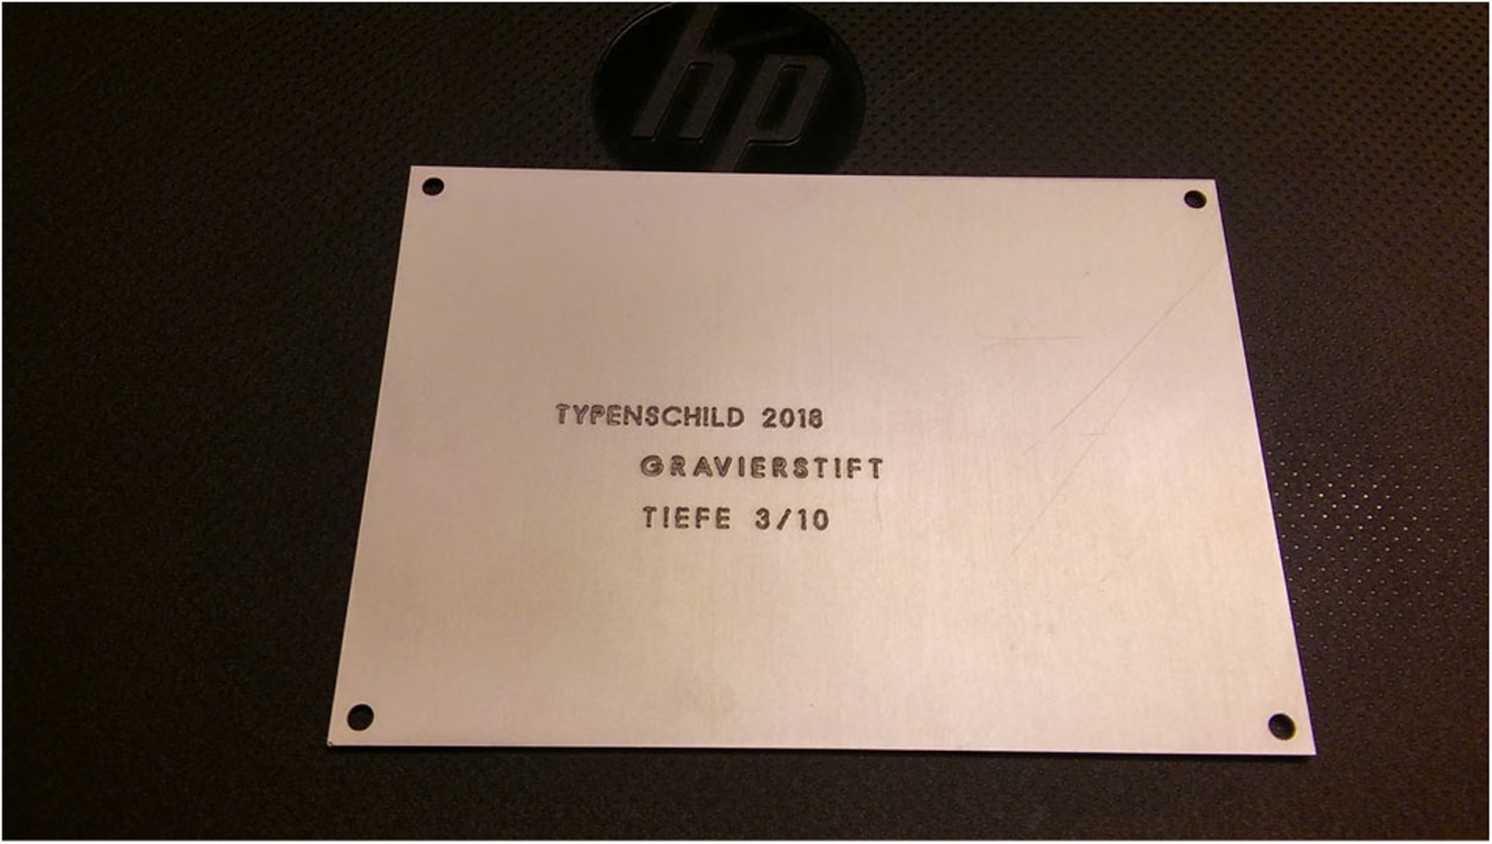 Full guidance about engraving on anodized aluminum